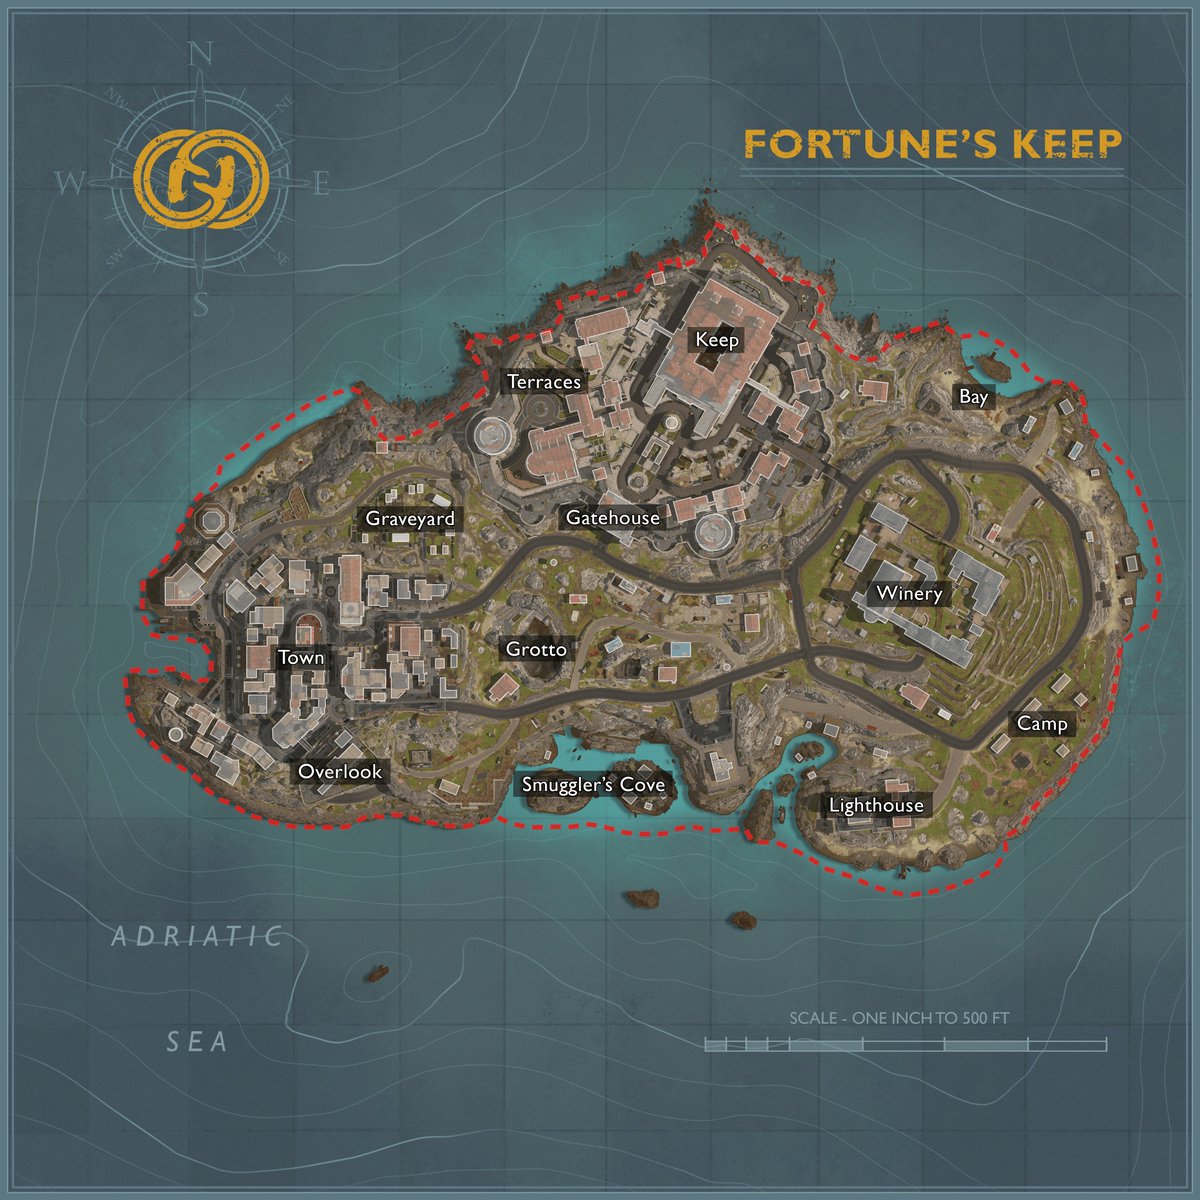 Image of the Fortune's Keep Tac Map